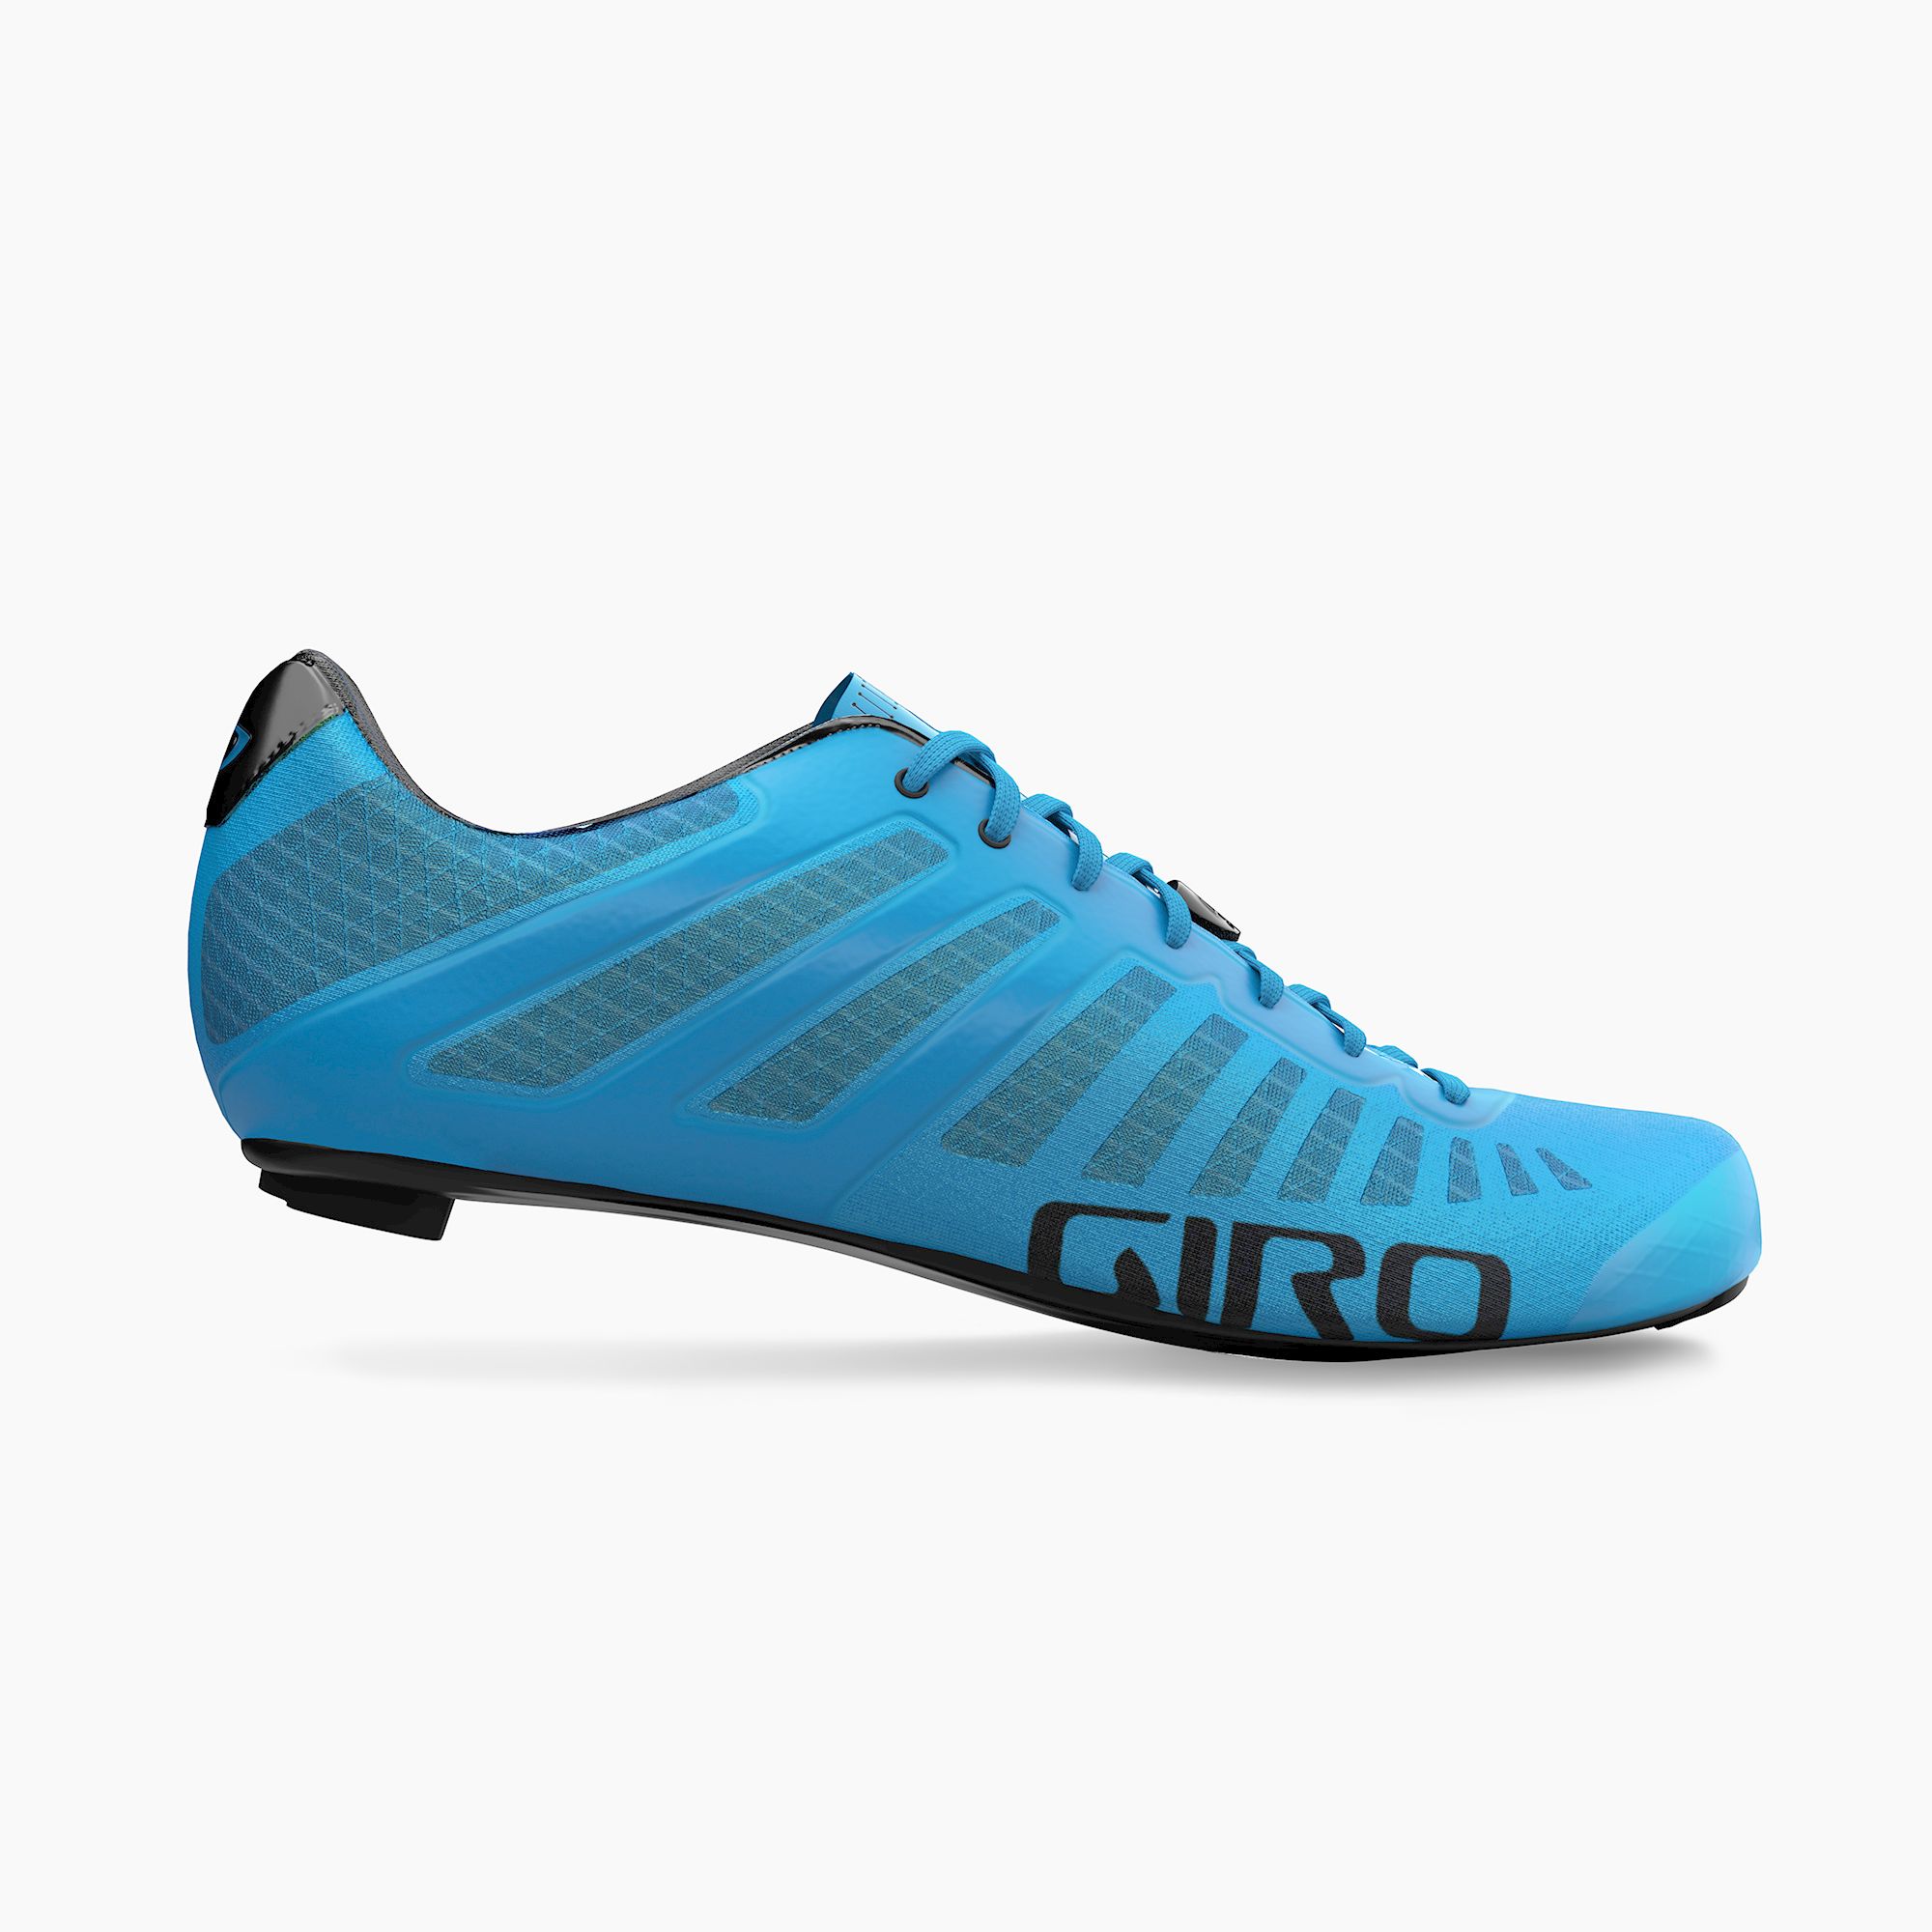 Details about   Giro Empire SLX Road Cycling Shoe Men's 42.5 EU/ 9 US RIGHT ONLY 